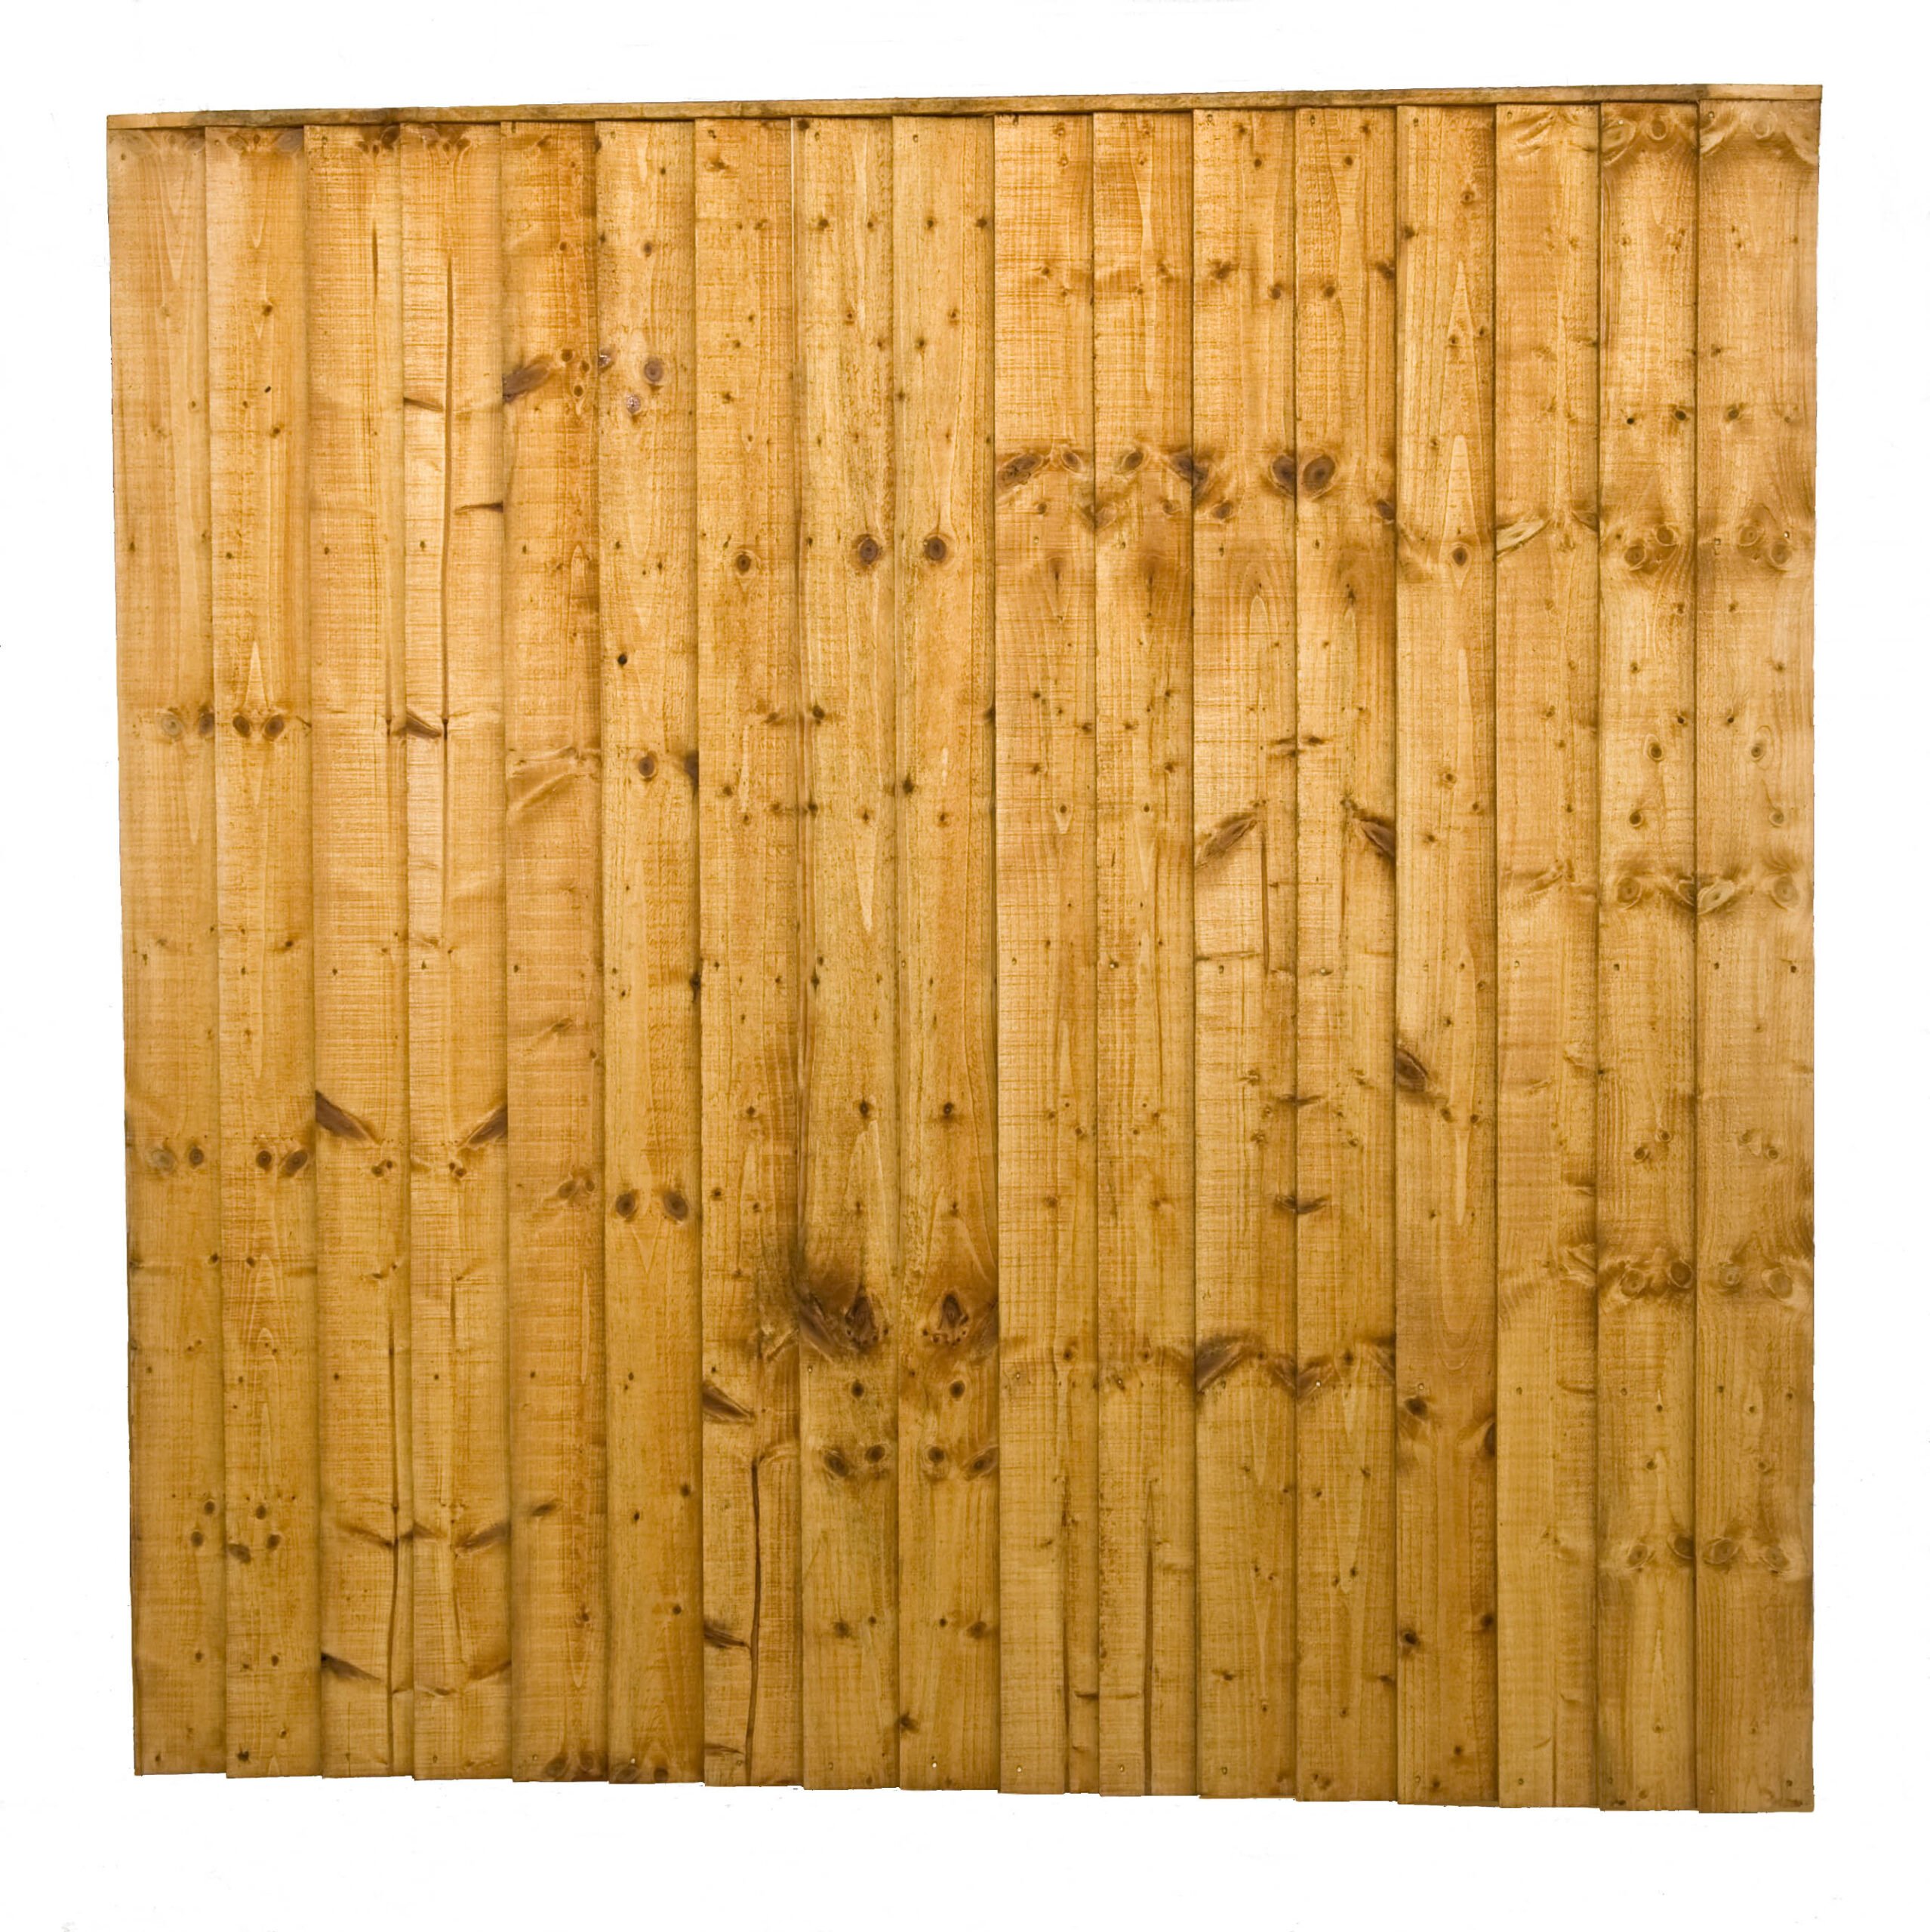 x Pack 3.6m 6 x 1 Pressure Treated Kick Boards Feather Edge Fencing Fence Base 01